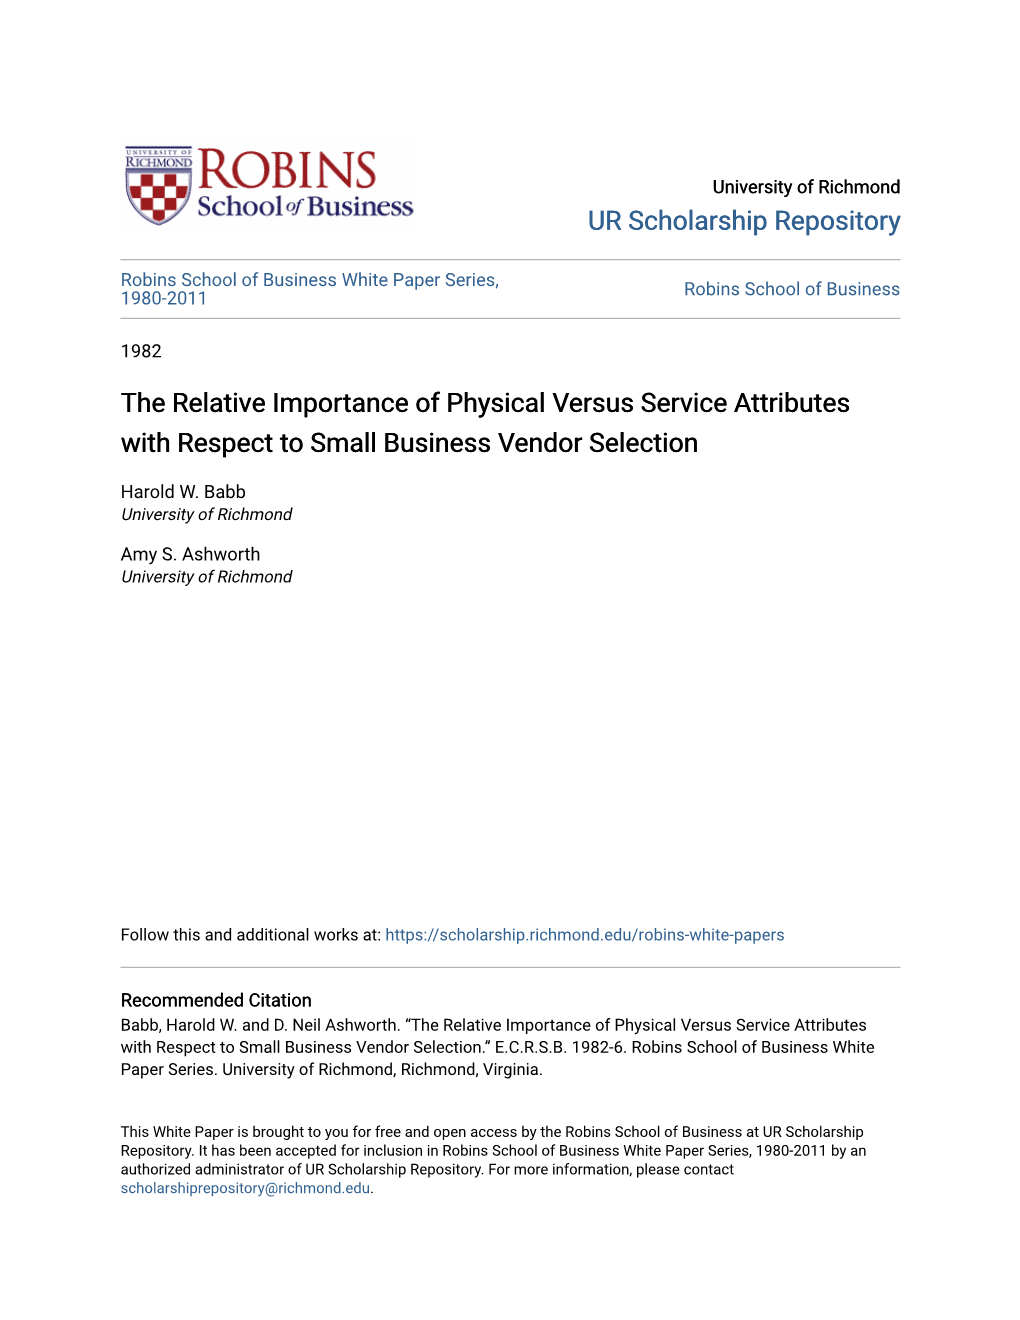 The Relative Importance of Physical Versus Service Attributes with Respect to Small Business Vendor Selection